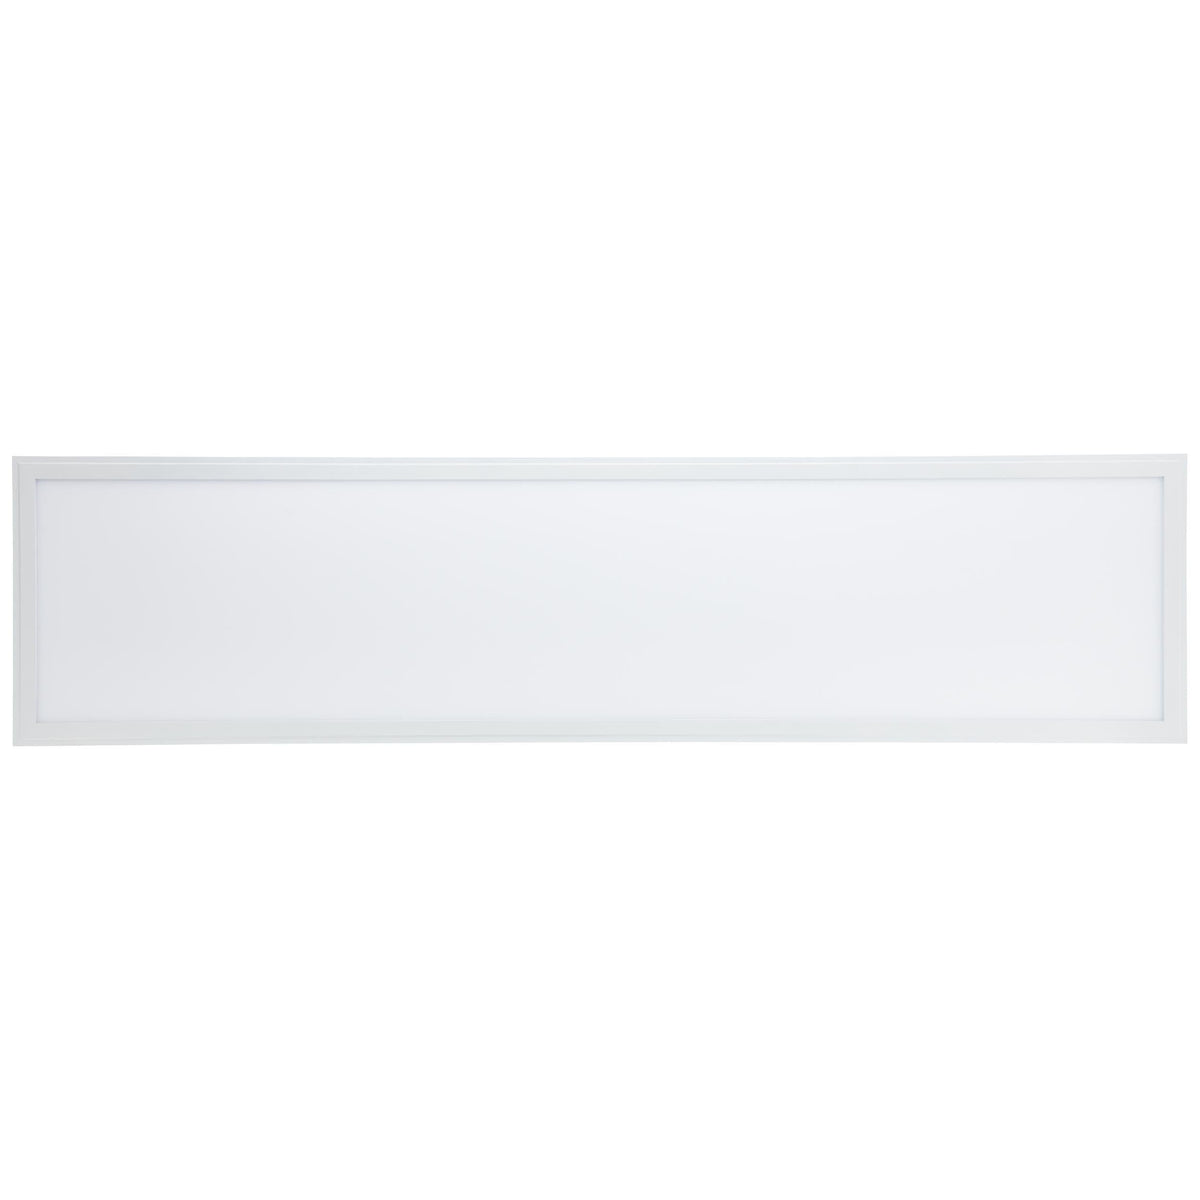 Brilliant 1 Light 37W Allie LED Ceiling Panel - White | G96948/05 from DID Electrical - guaranteed Irish, guaranteed quality service. (6977603797180)